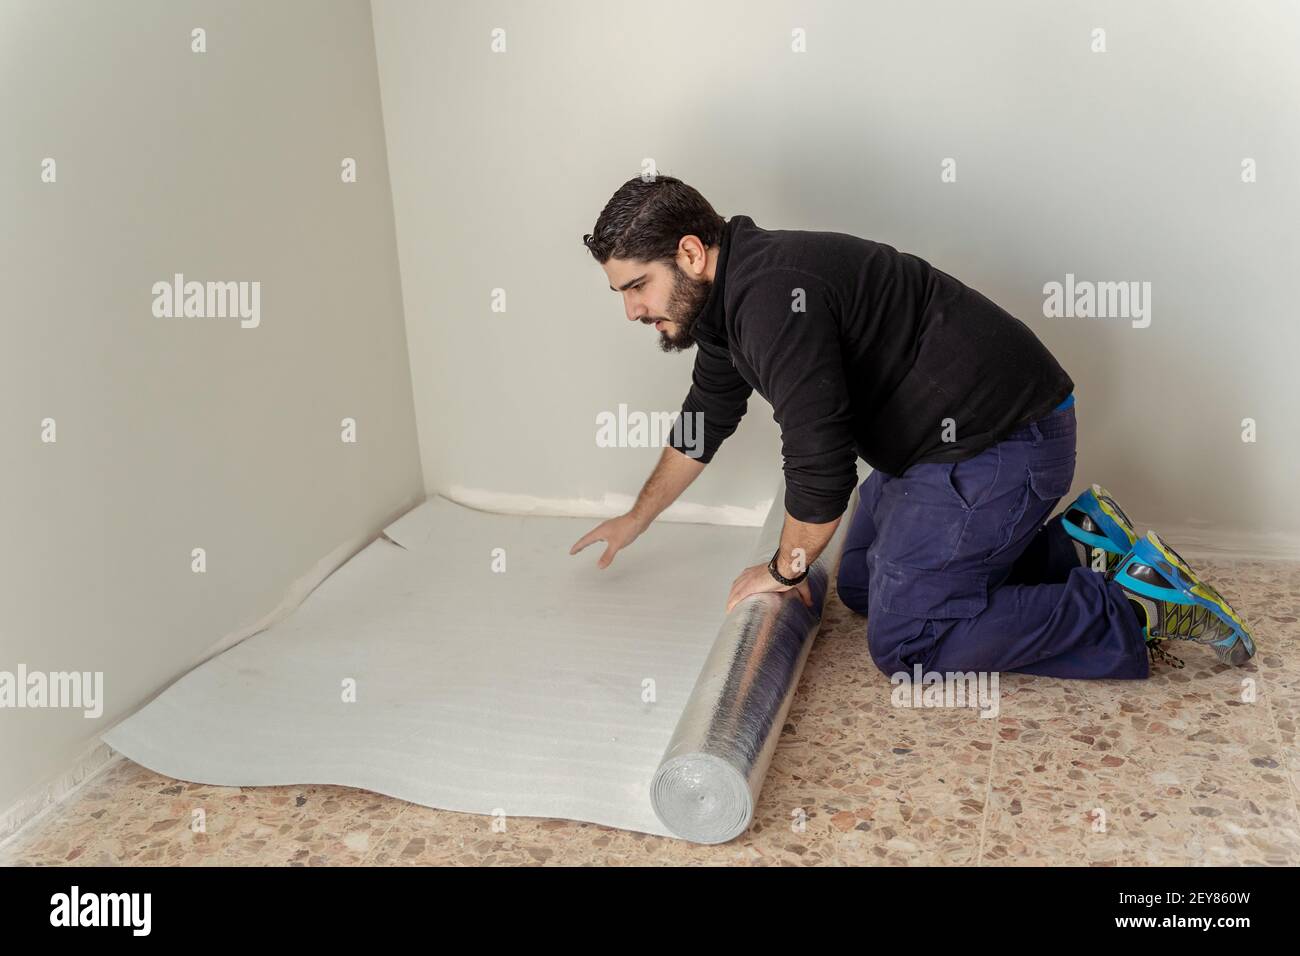 Builder man spreading the floor insulation to install the wooden floor Stock Photo